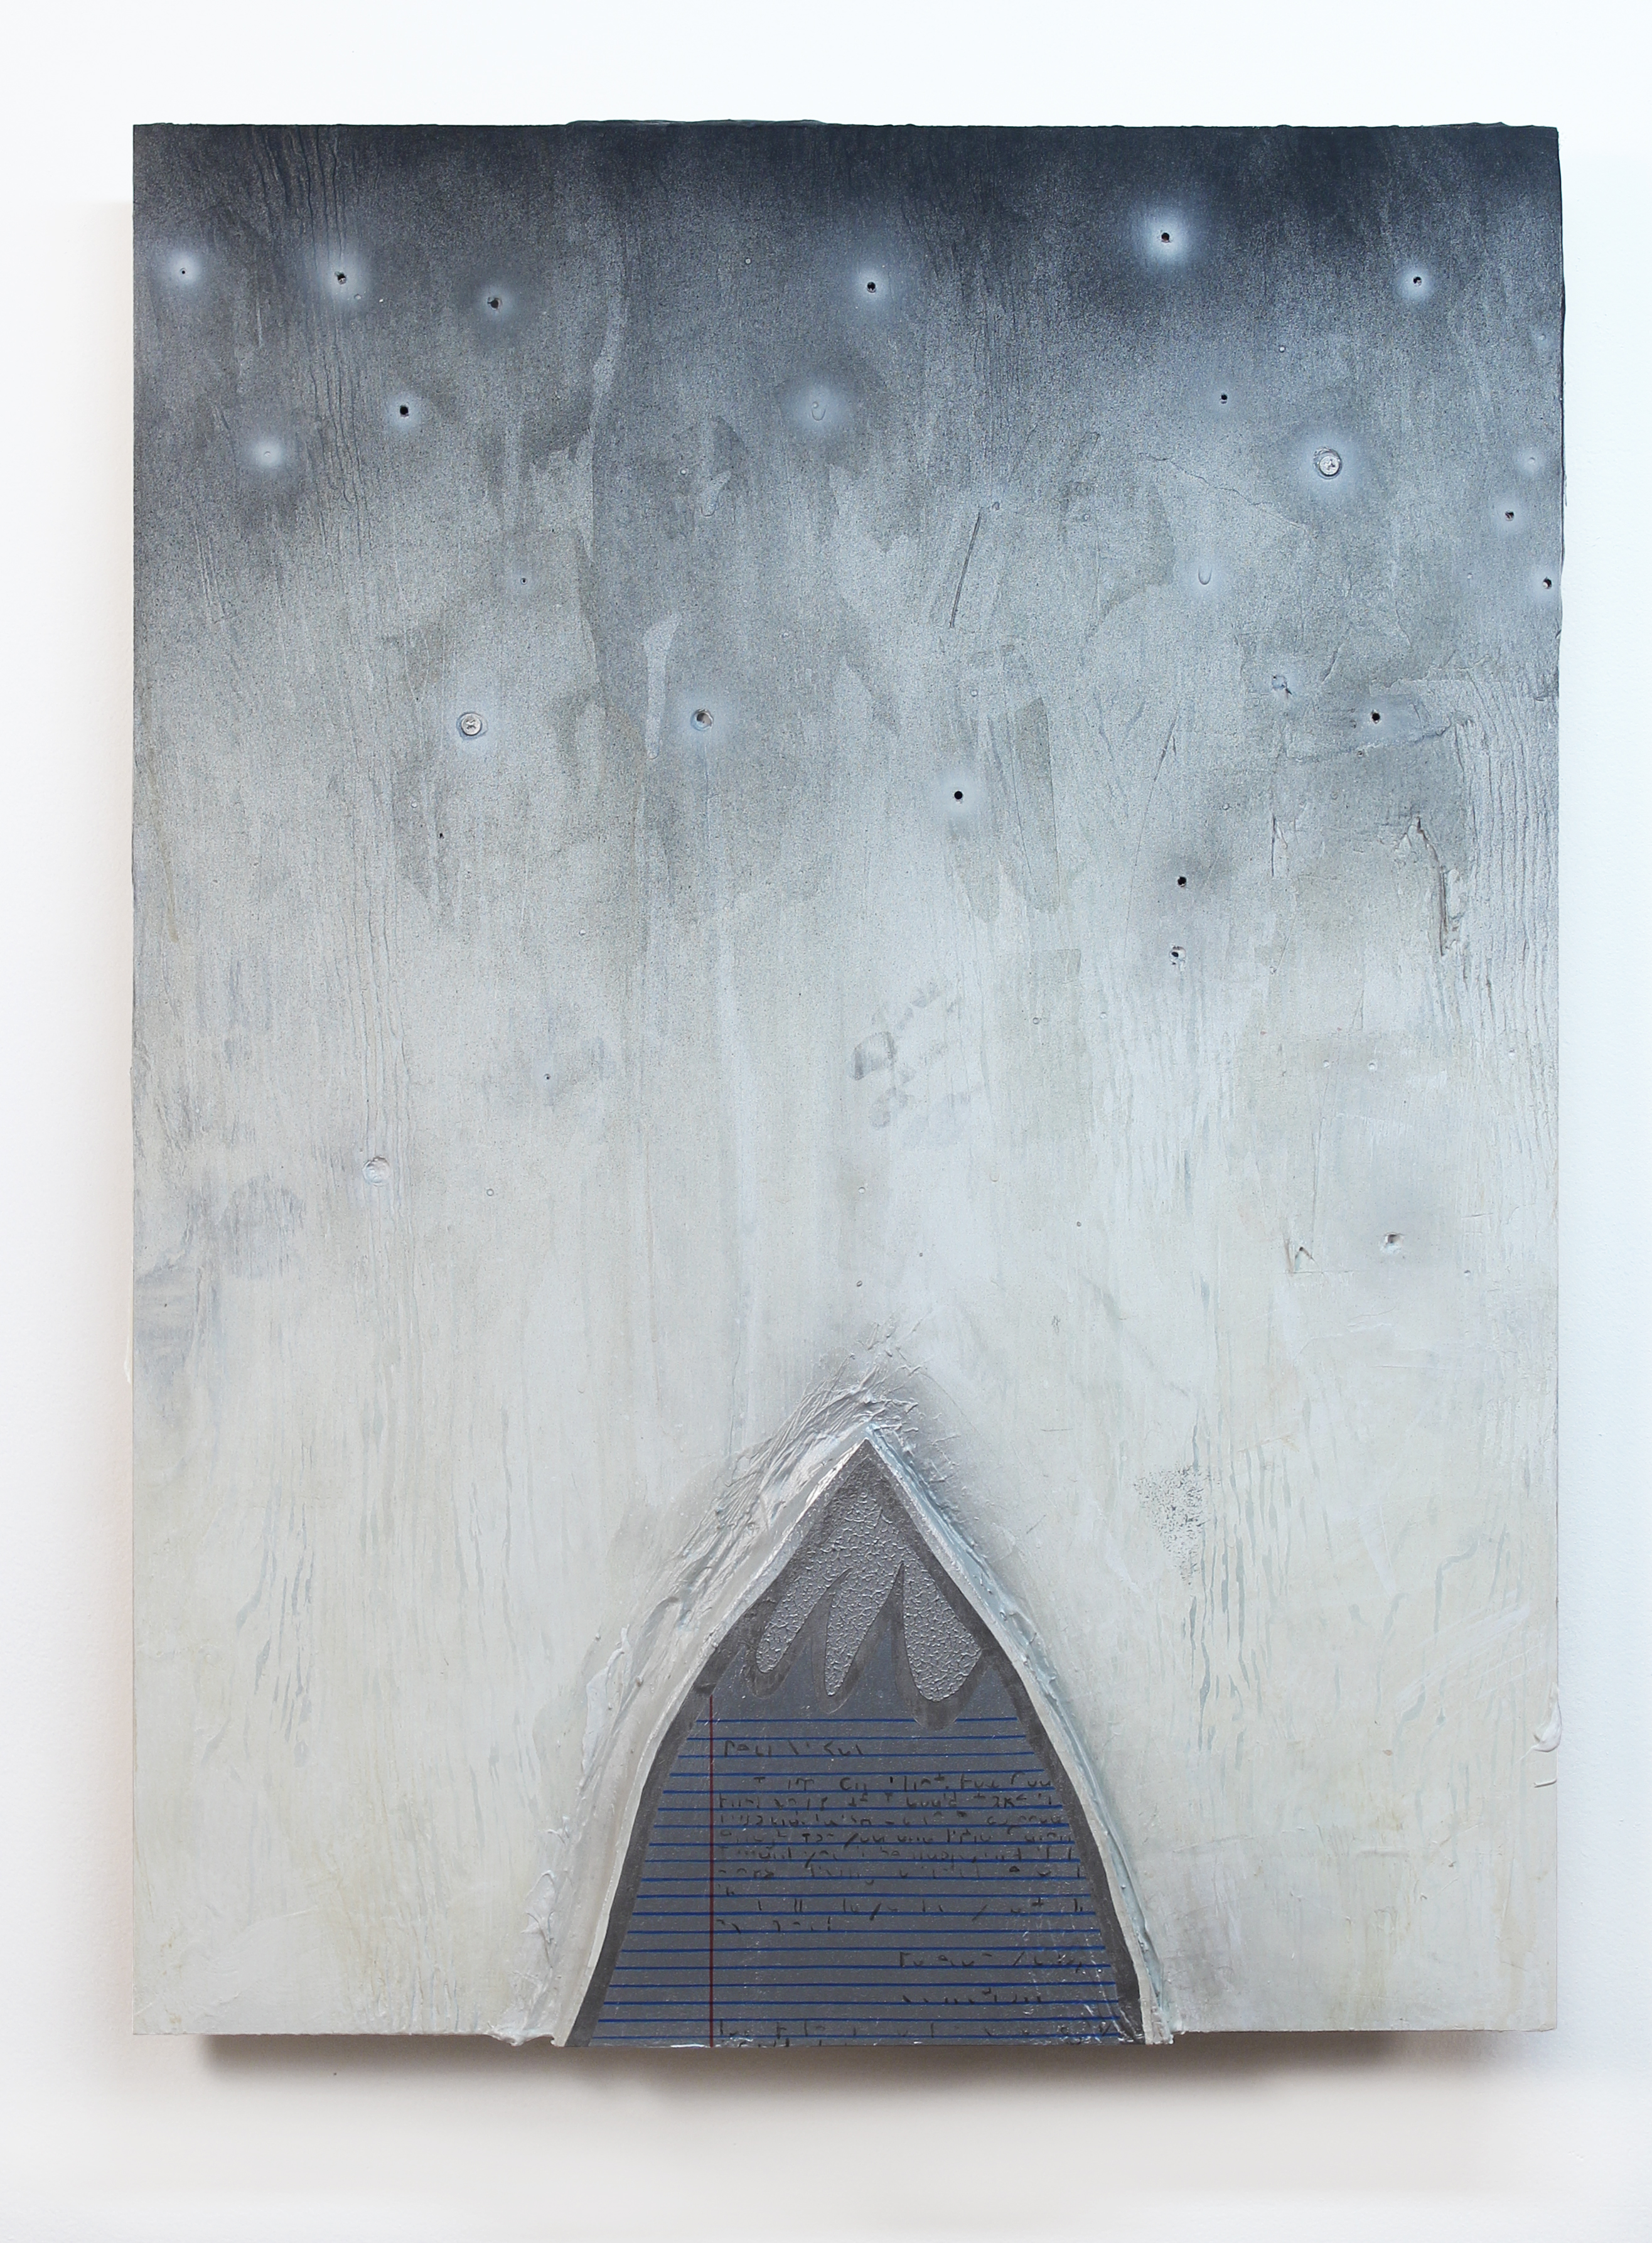 Willie_Smith-16_Night_Descending_on_a_Mountain_of_Things_Left_Unsaid_2015__Acrylic_graphite_and_painted_plastic_on_wood_panel_with_drilled_holes